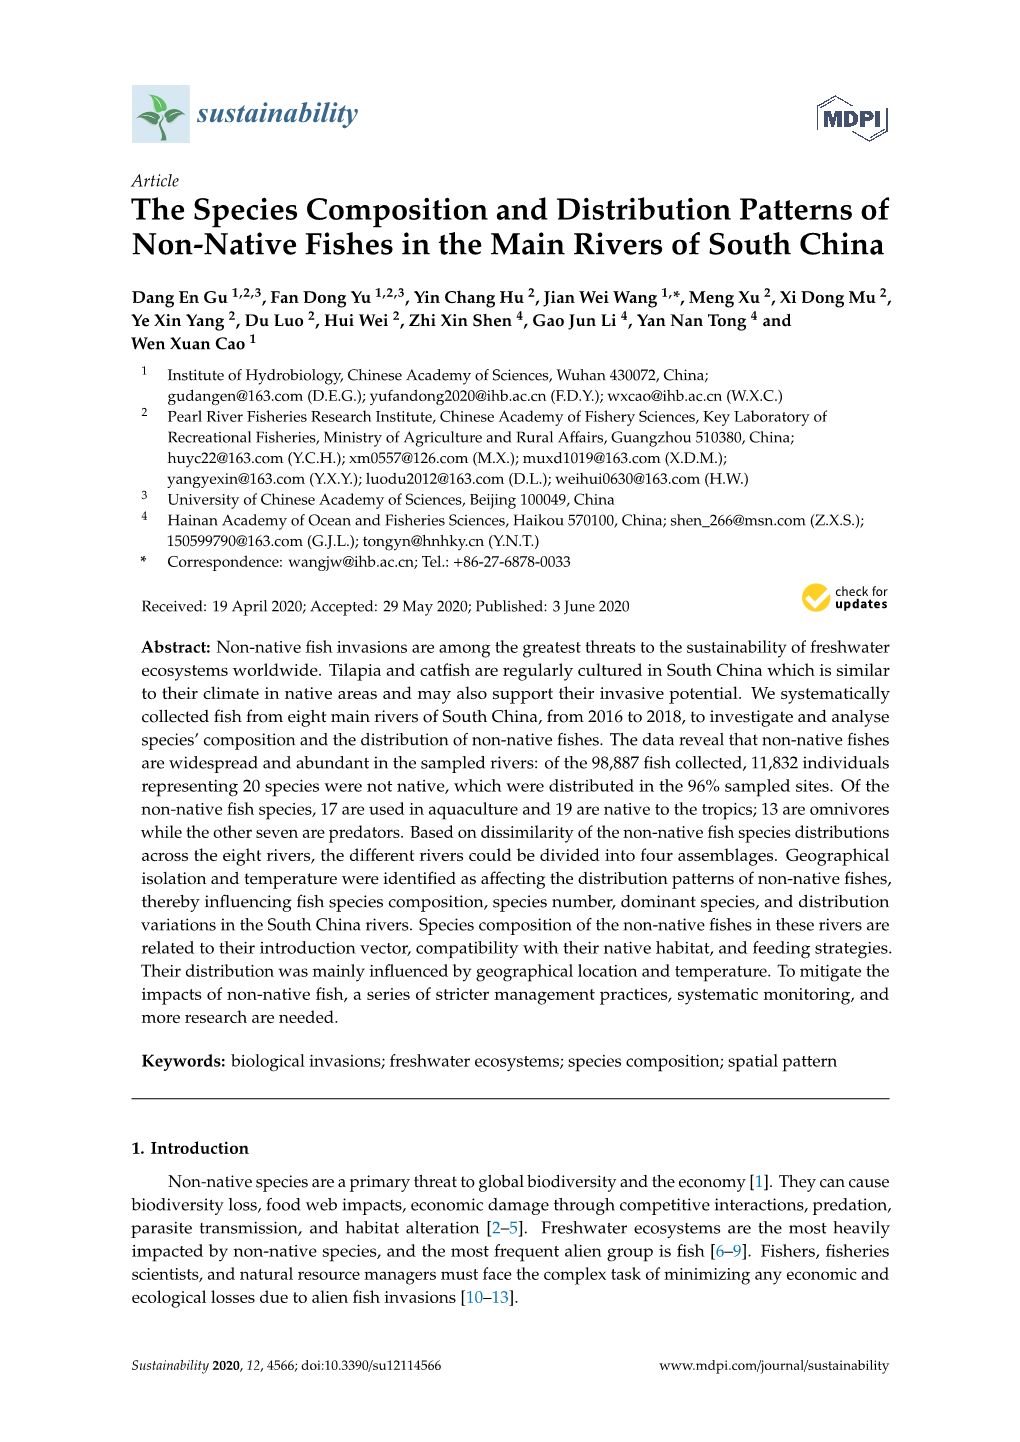 The Species Composition and Distribution Patterns of Non-Native Fishes in the Main Rivers of South China